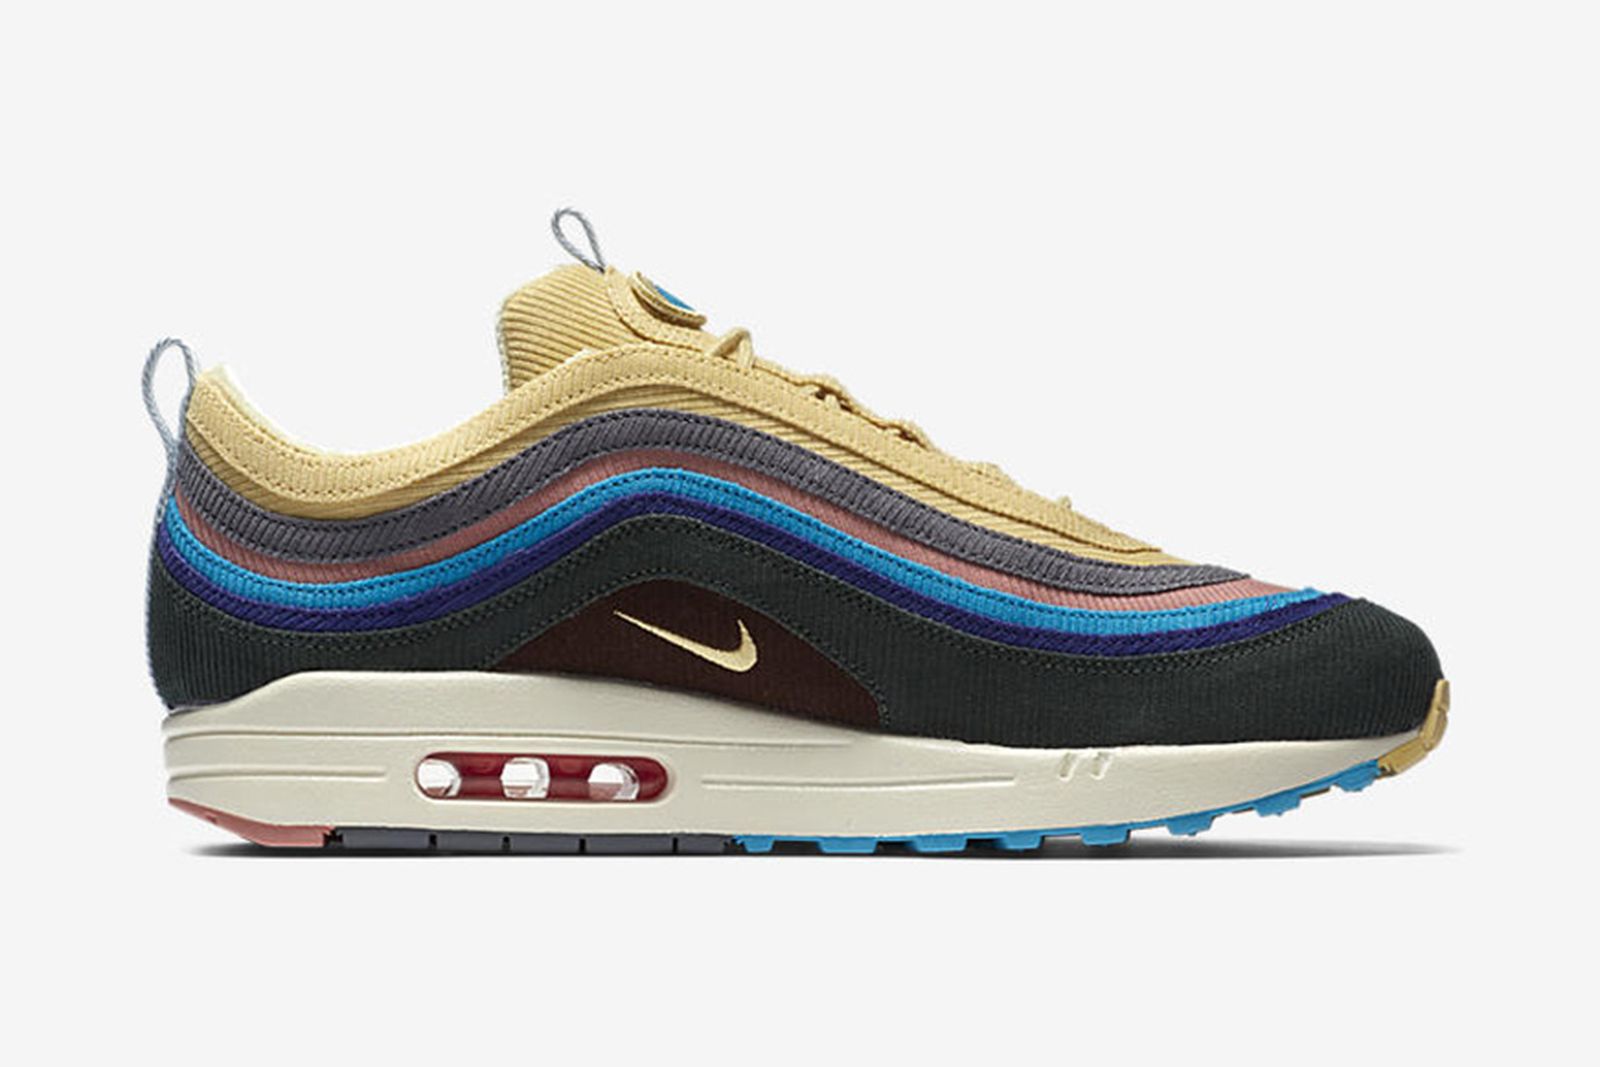 Sean Wotherspoon x Nike Air Max 1/97: Release Date, Price, Info